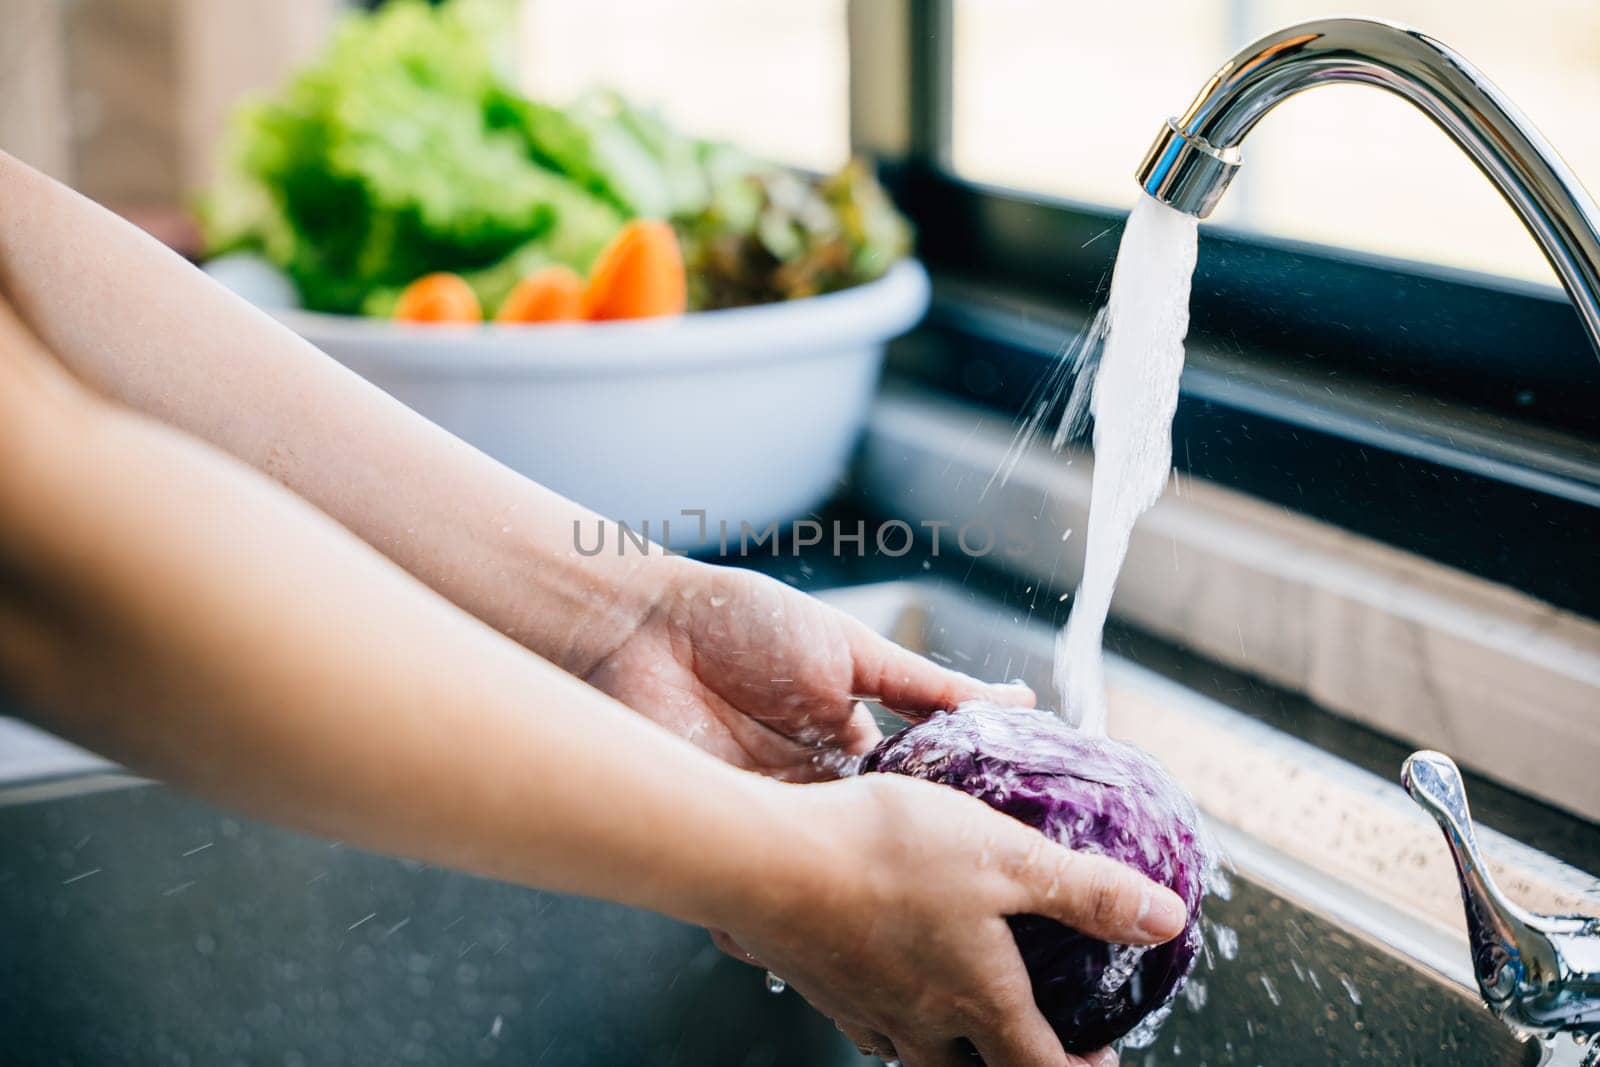 Bright clean vegetables being washed by Sorapop